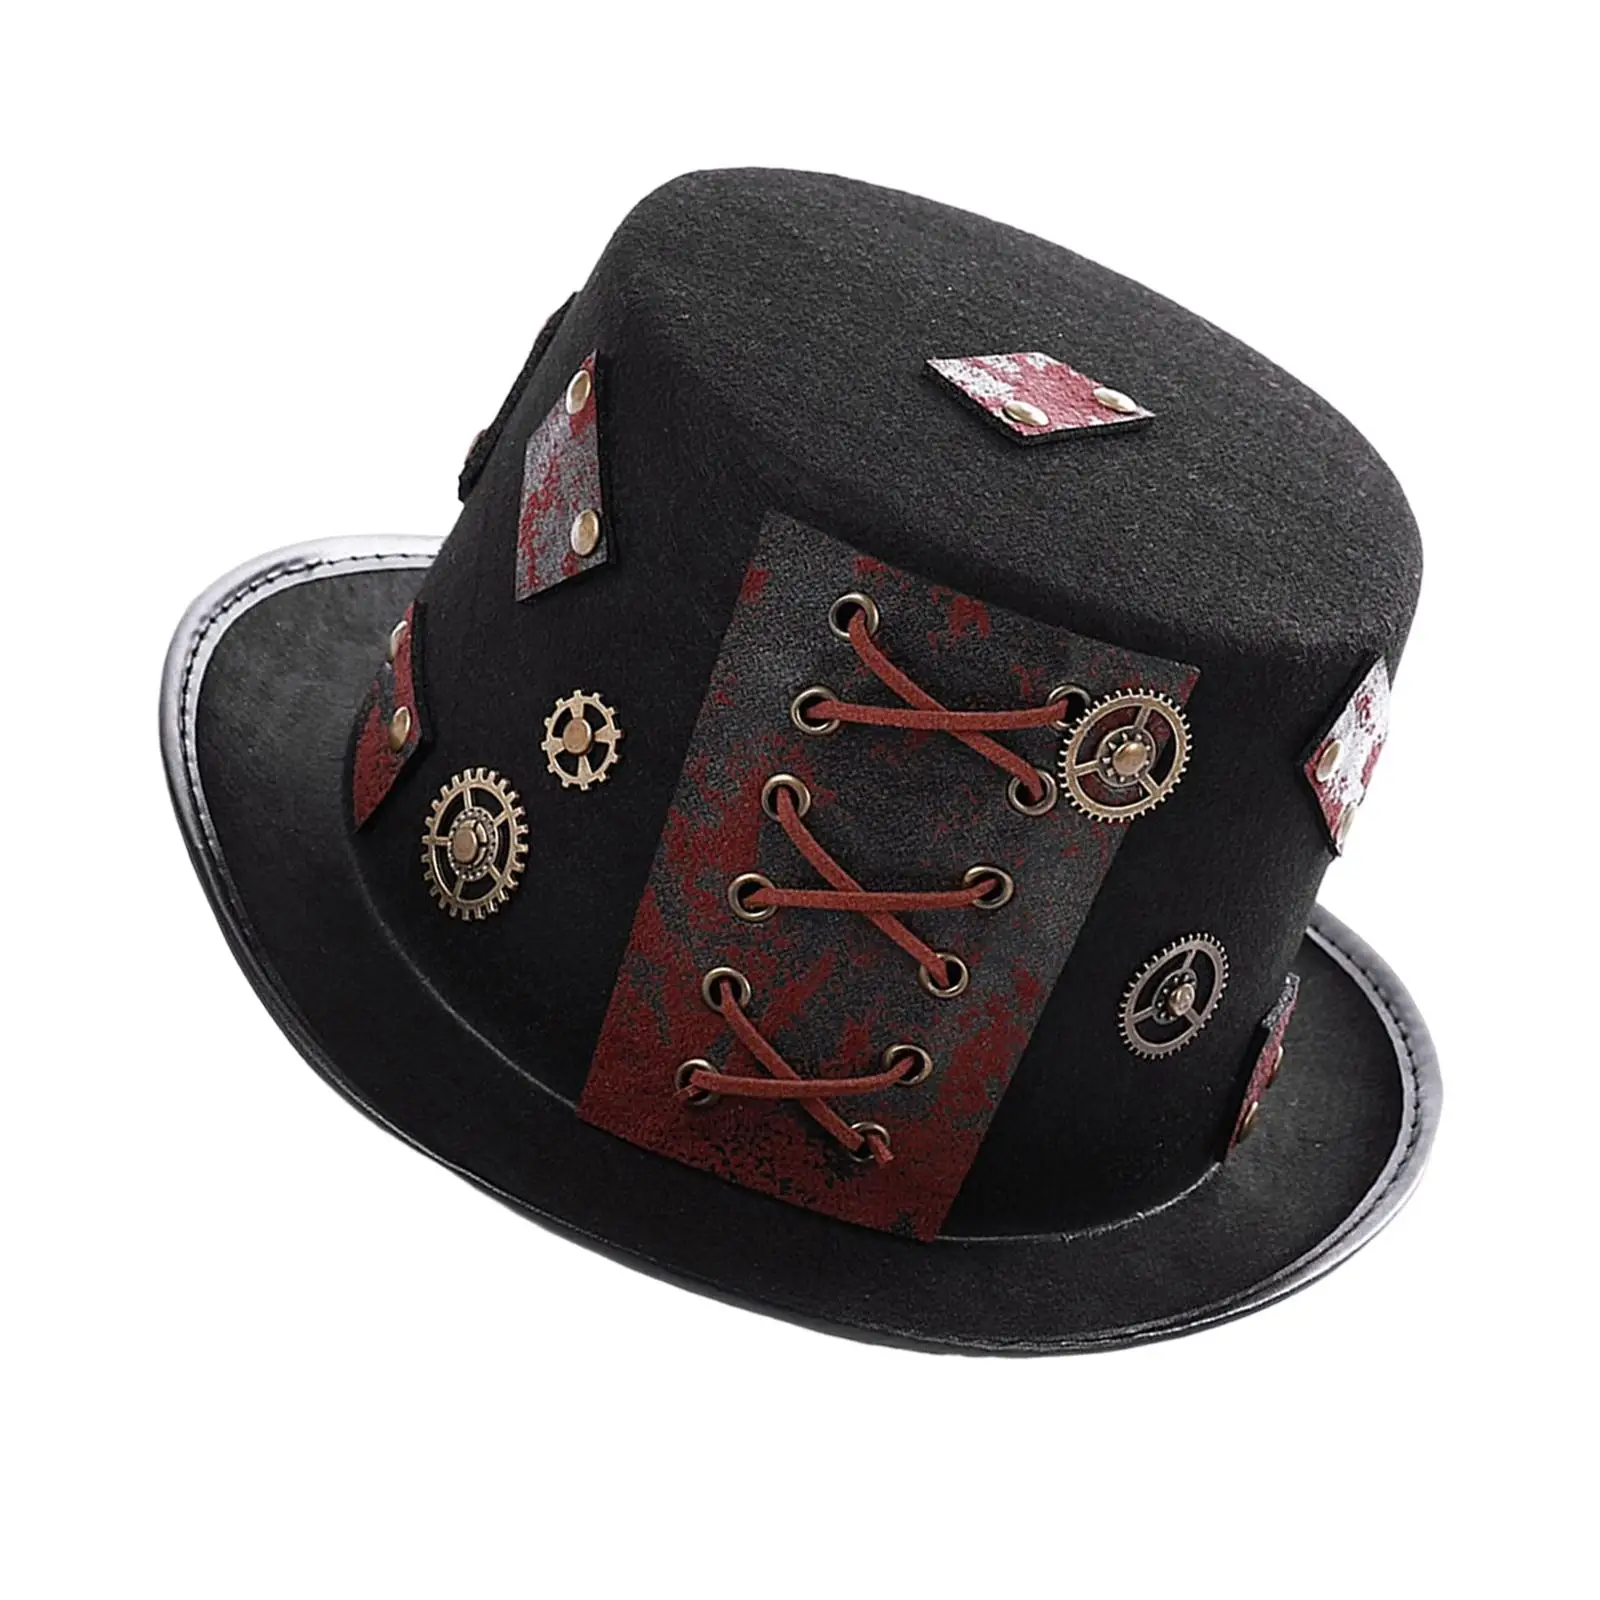  Steampunk Top Hat with String Gear Cosplay Costume Hat, Accessories Masquerade Costume Party for  Carnival Elegant